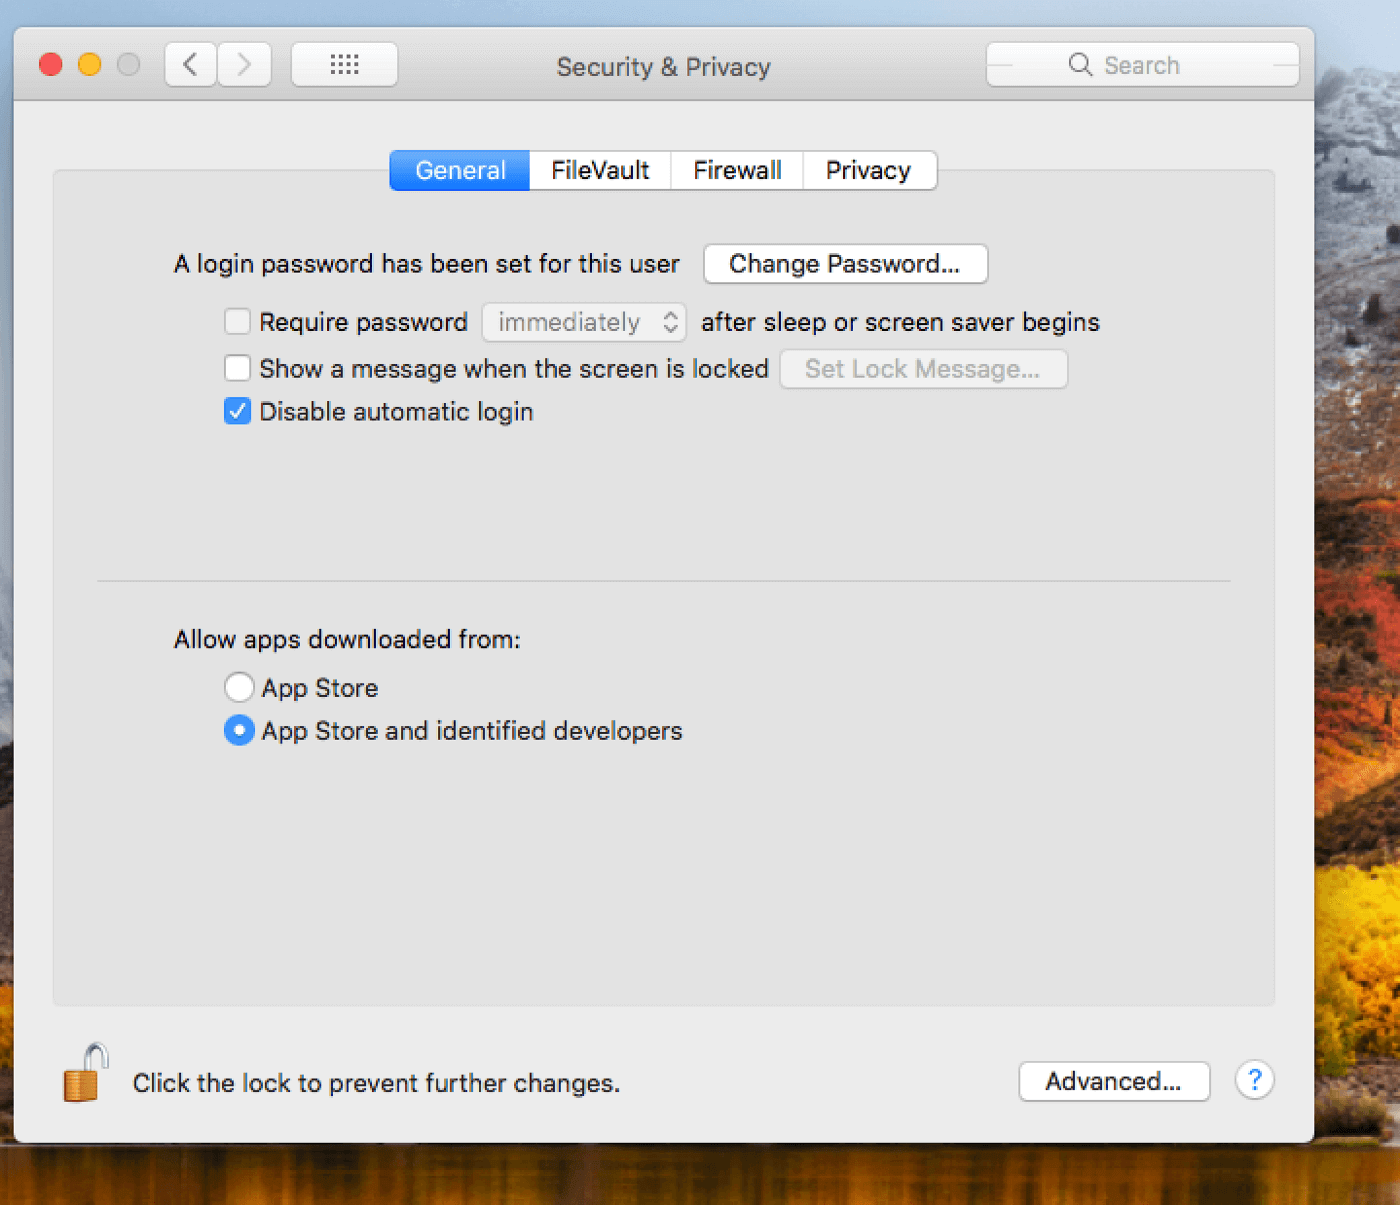 A screenshot of the security and privacy settings window on macOS